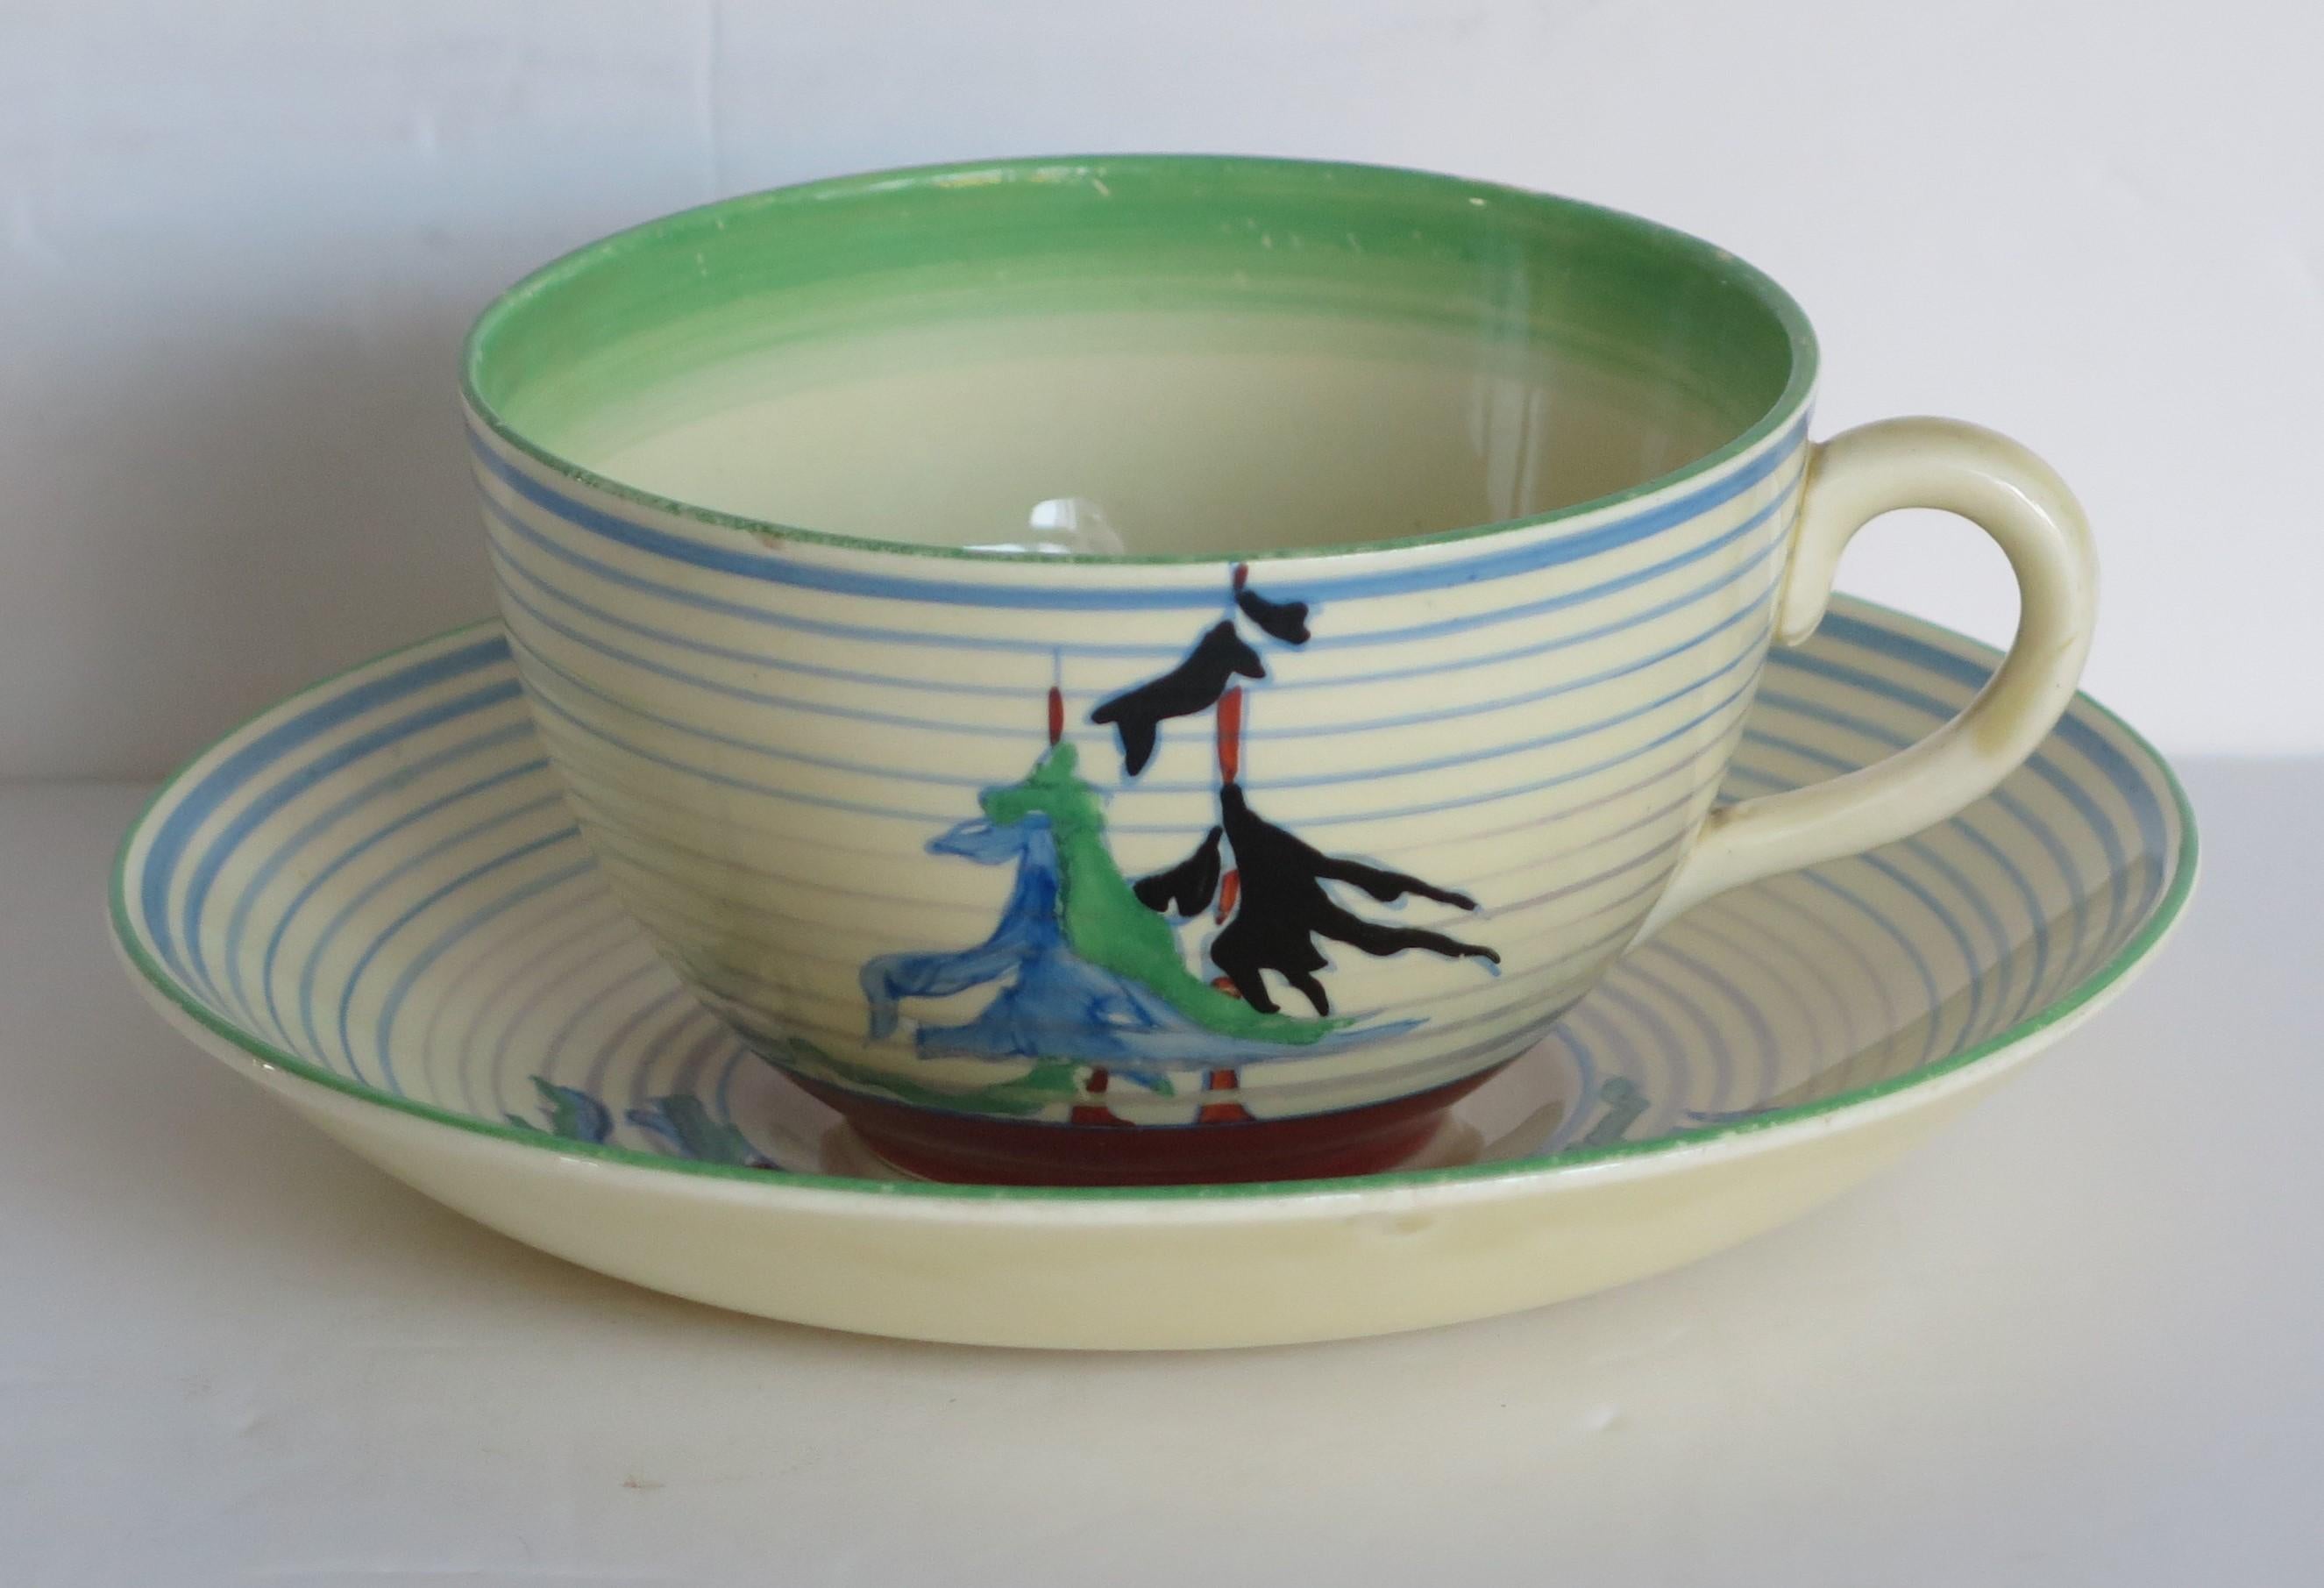 This is a cup & saucer duo in the rarely seen, hand painted 